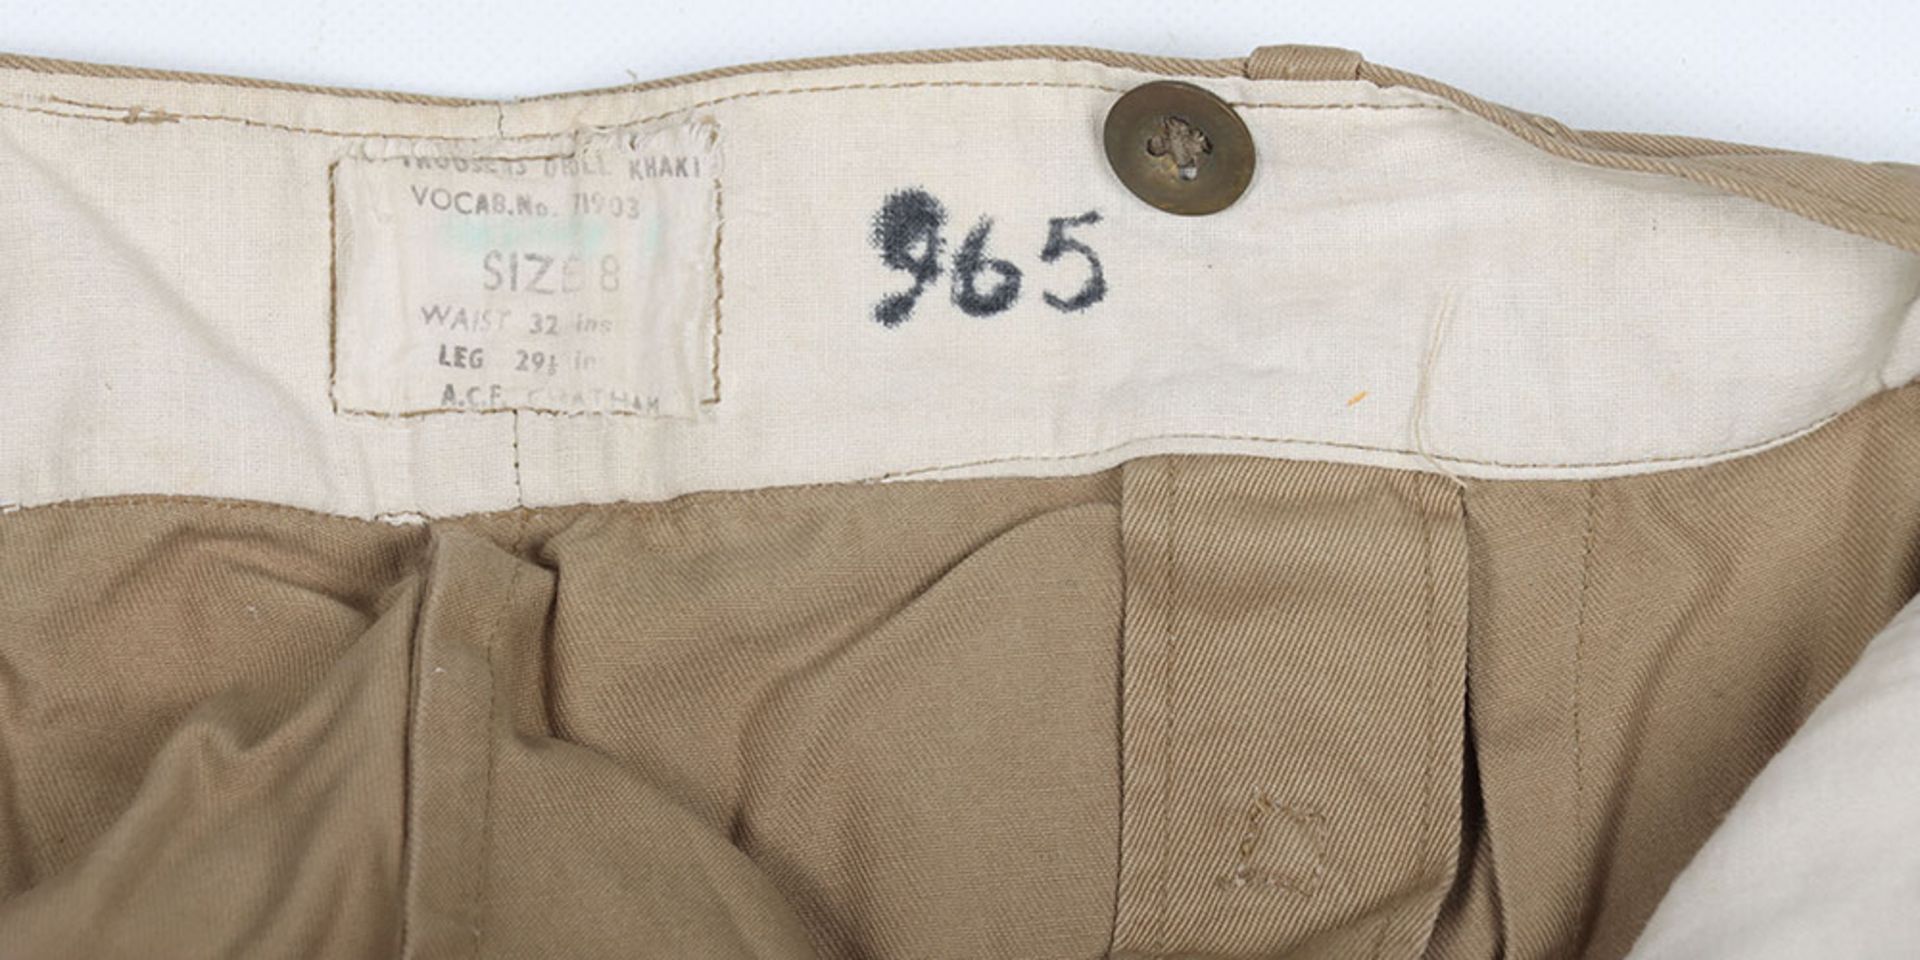 British Post War Royal Marines KD Tunic and Trousers Worn by Swimmer Canoeist T D Hughes During his - Image 14 of 15